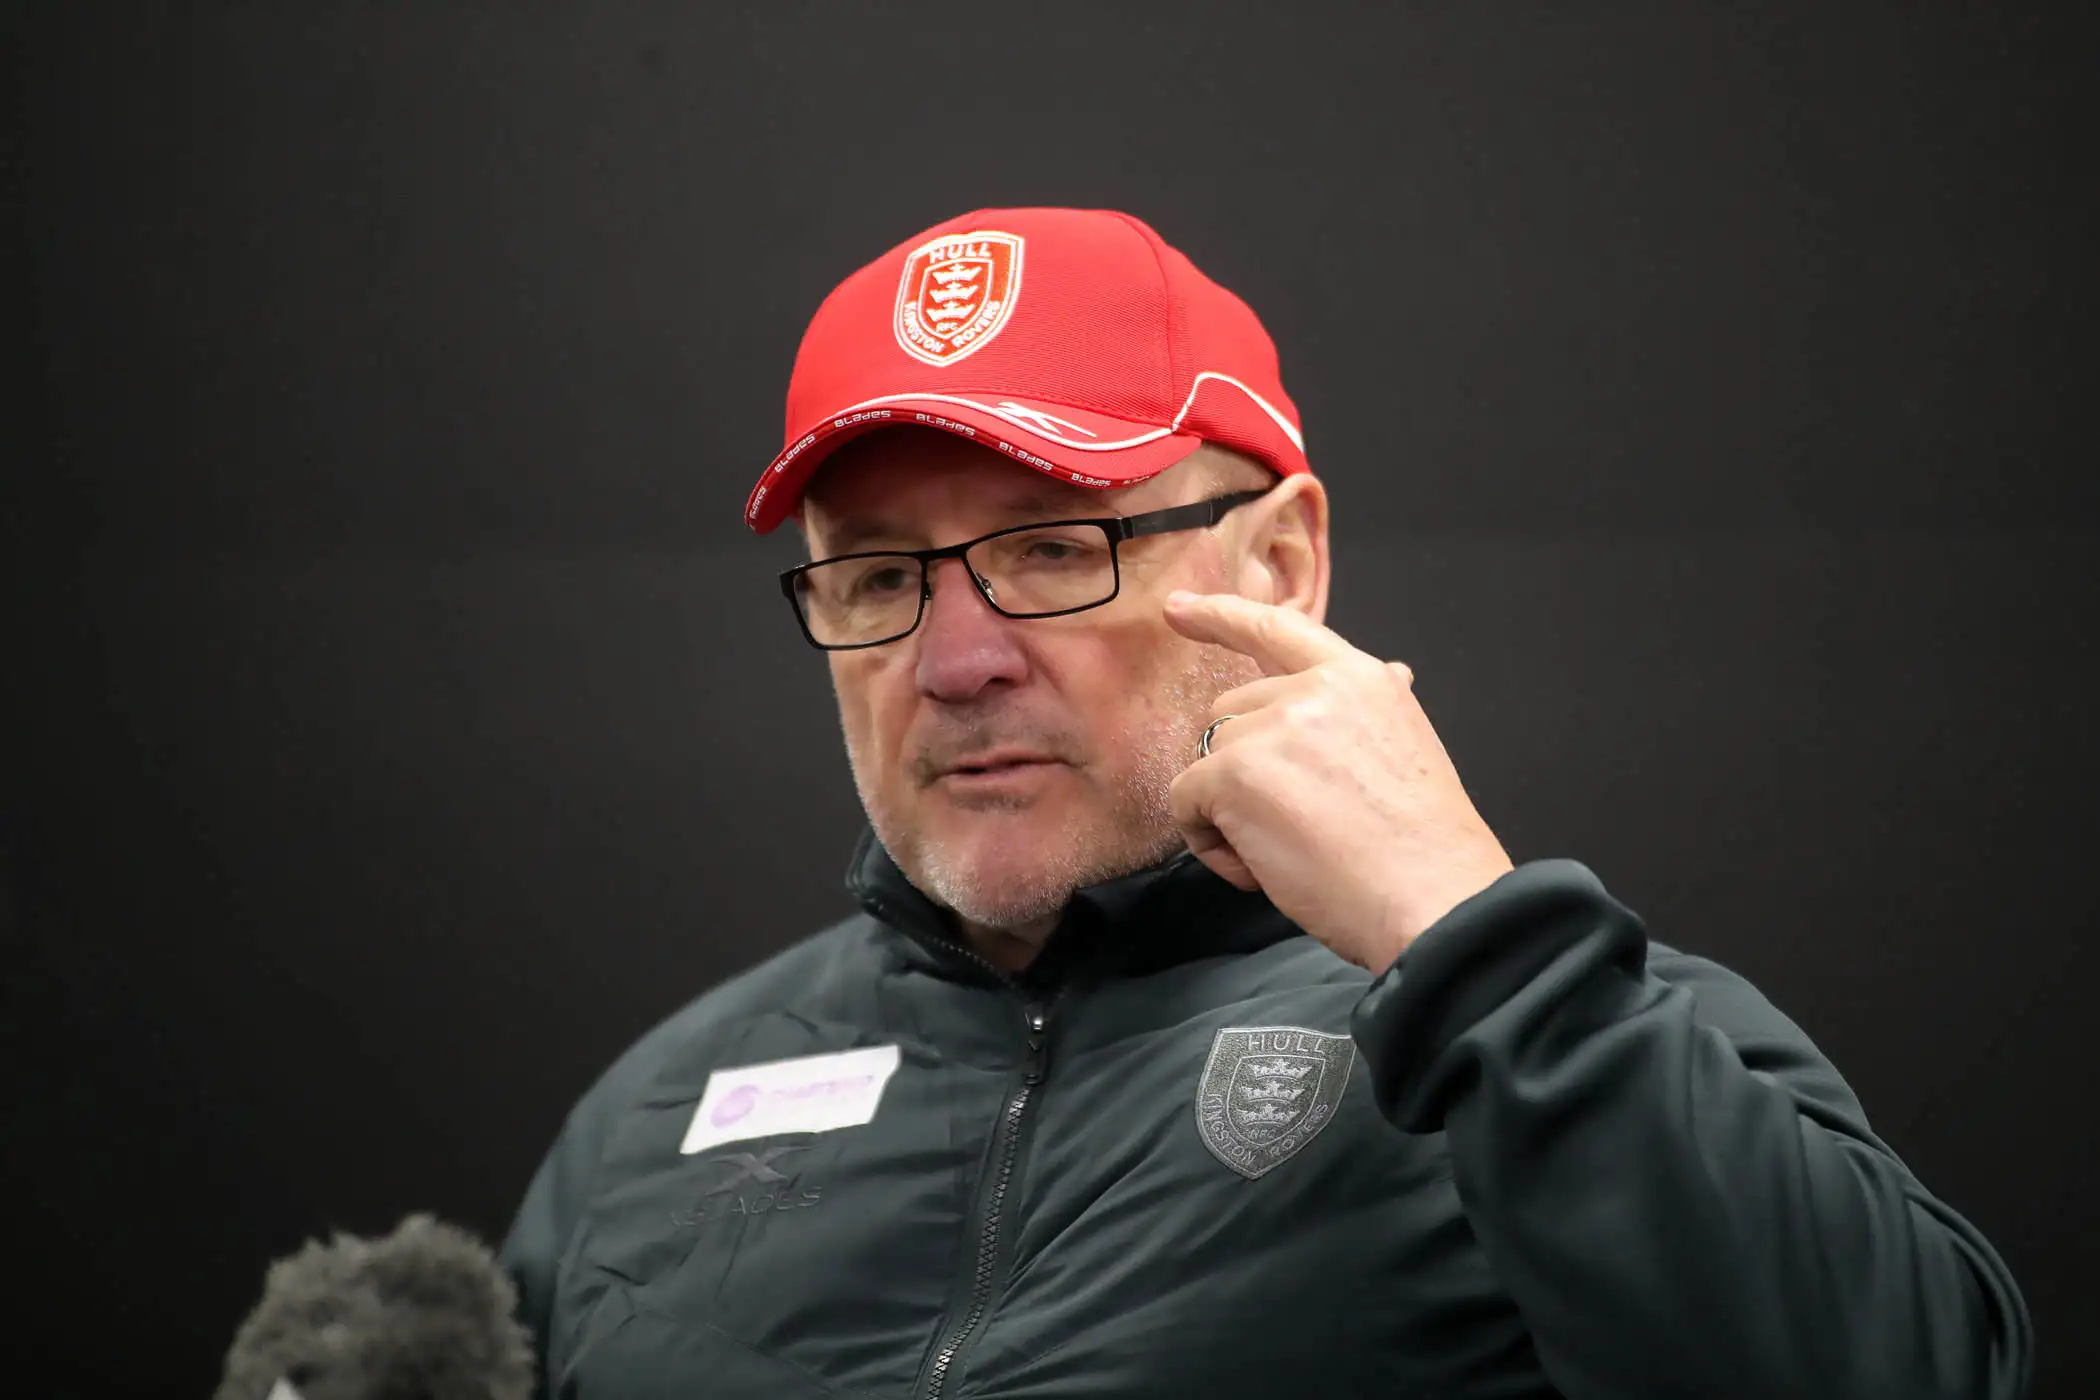 Hull KR players did not work together against Wigan, admits Tim Sheens